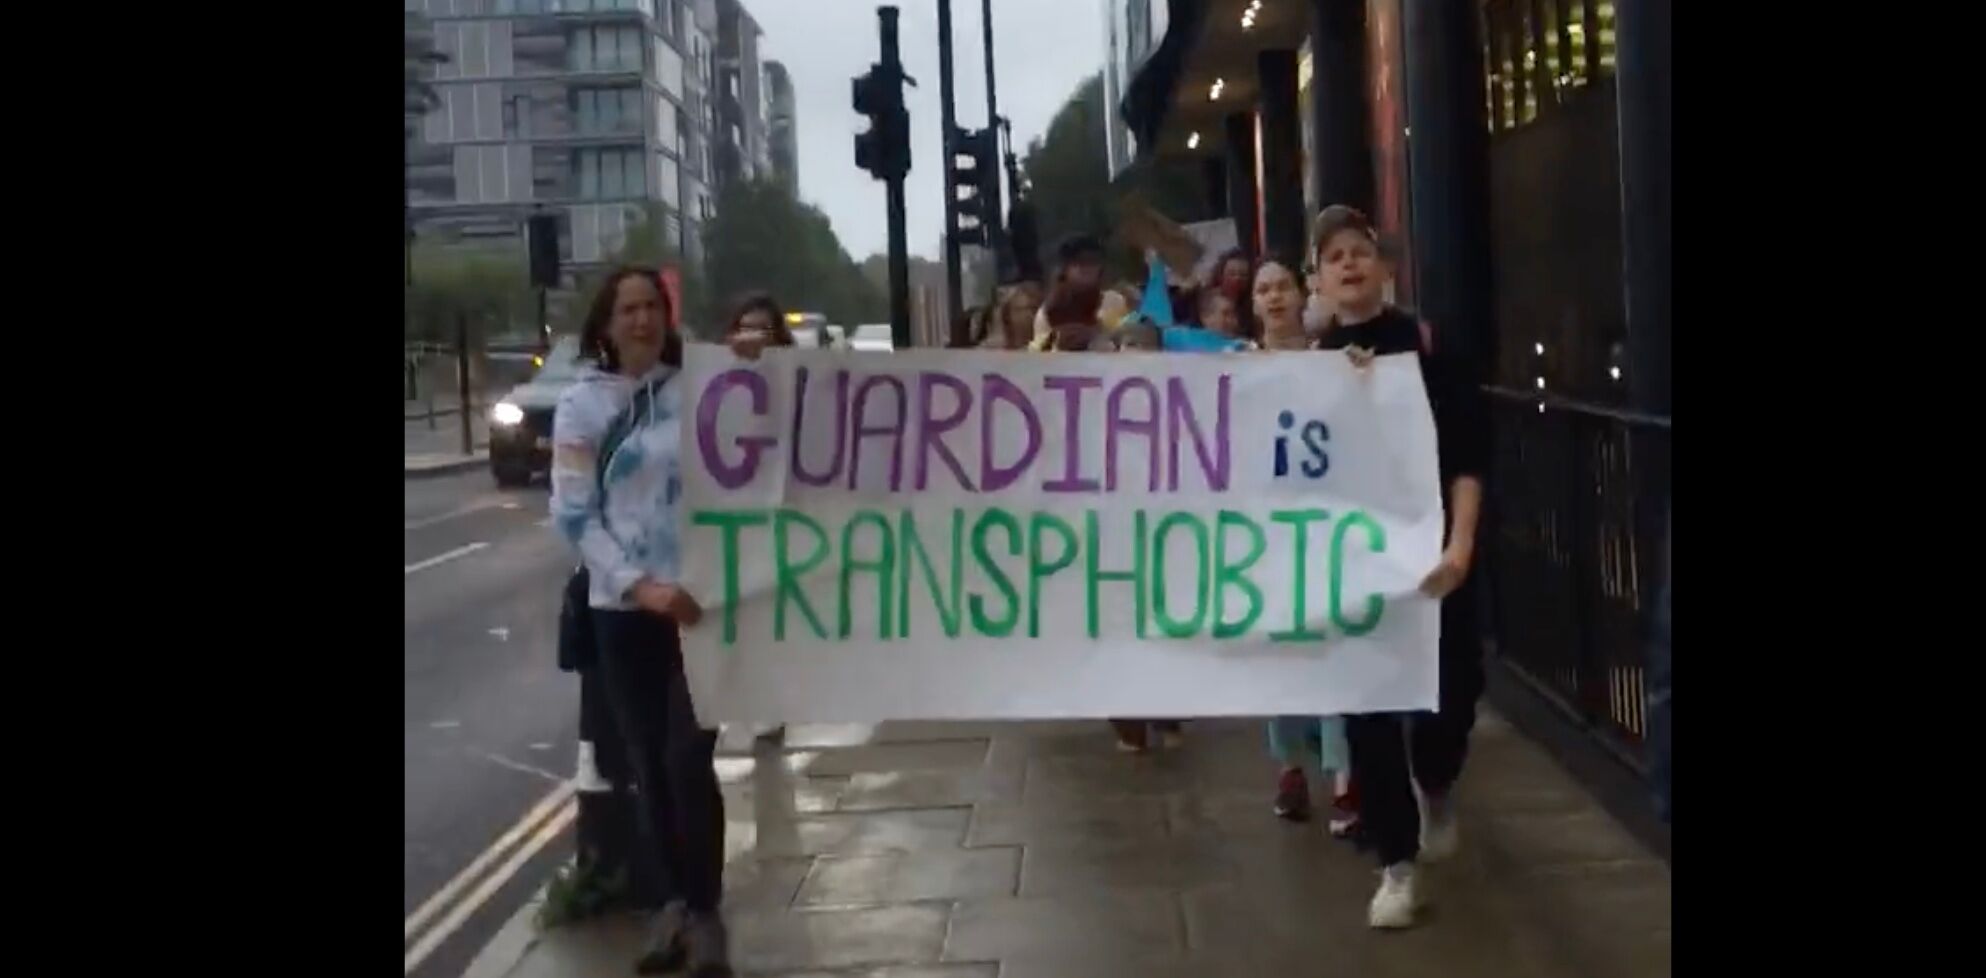 Guardian columnist ties cis male murderer to trans women. Now people are protesting their office.